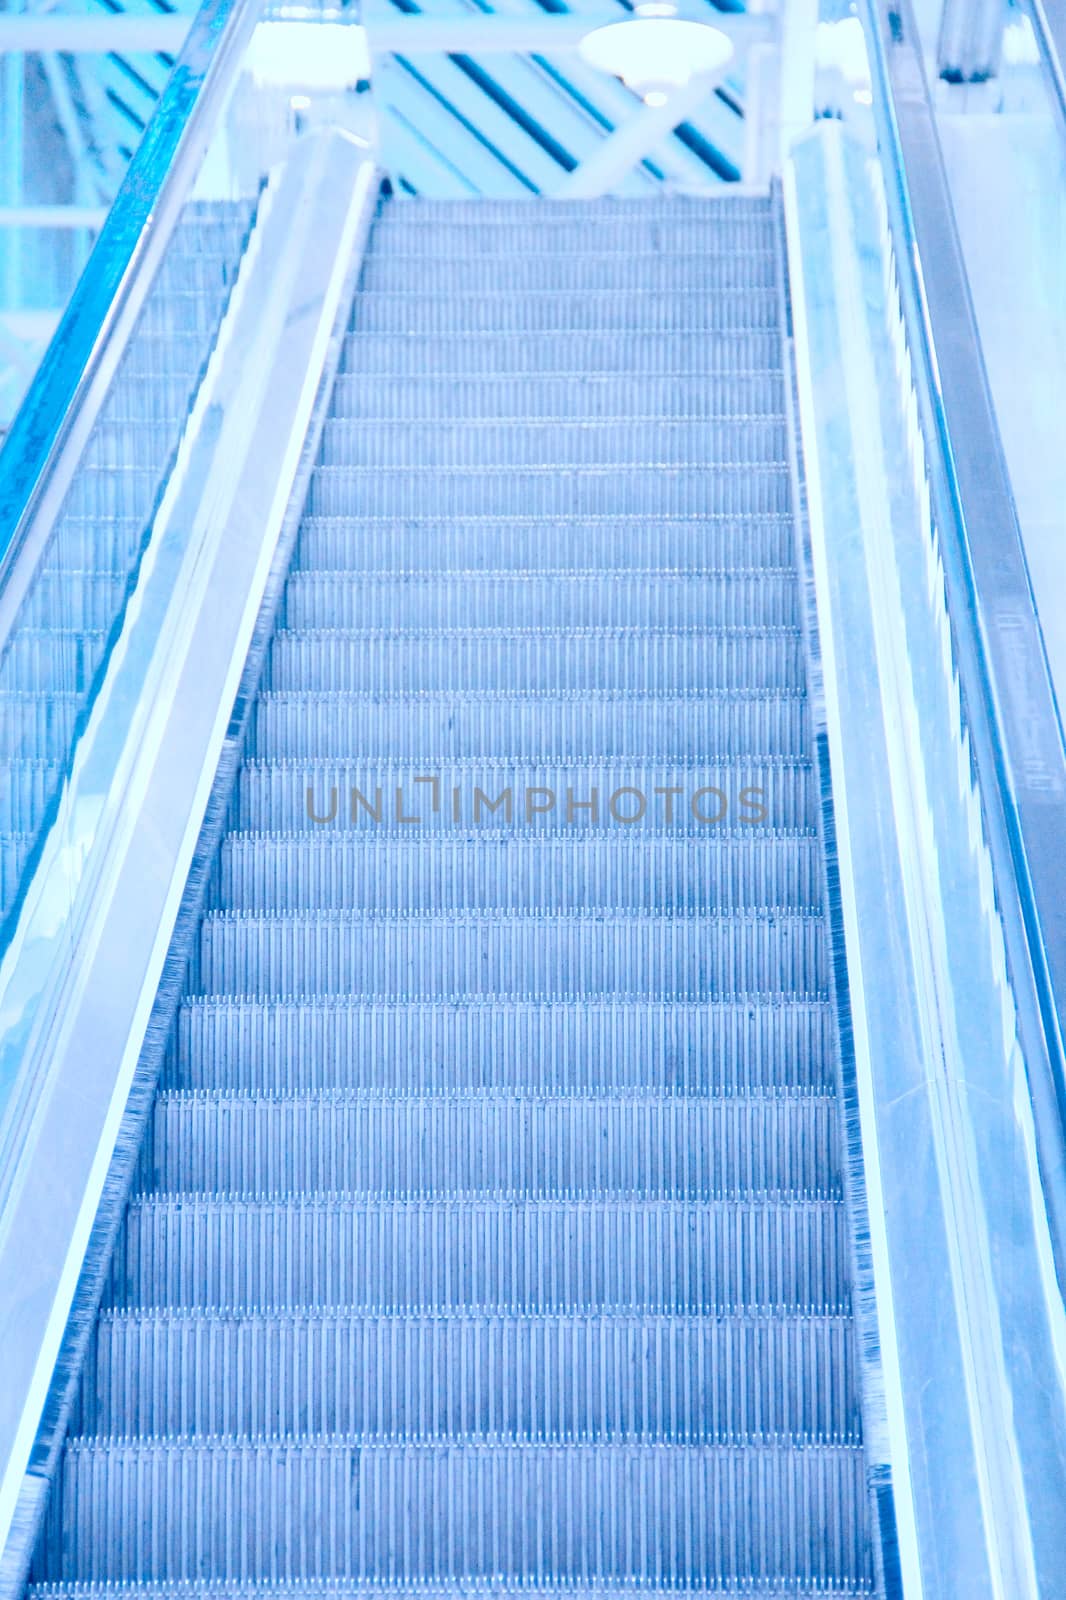 Perspective of escalator toned in blue color